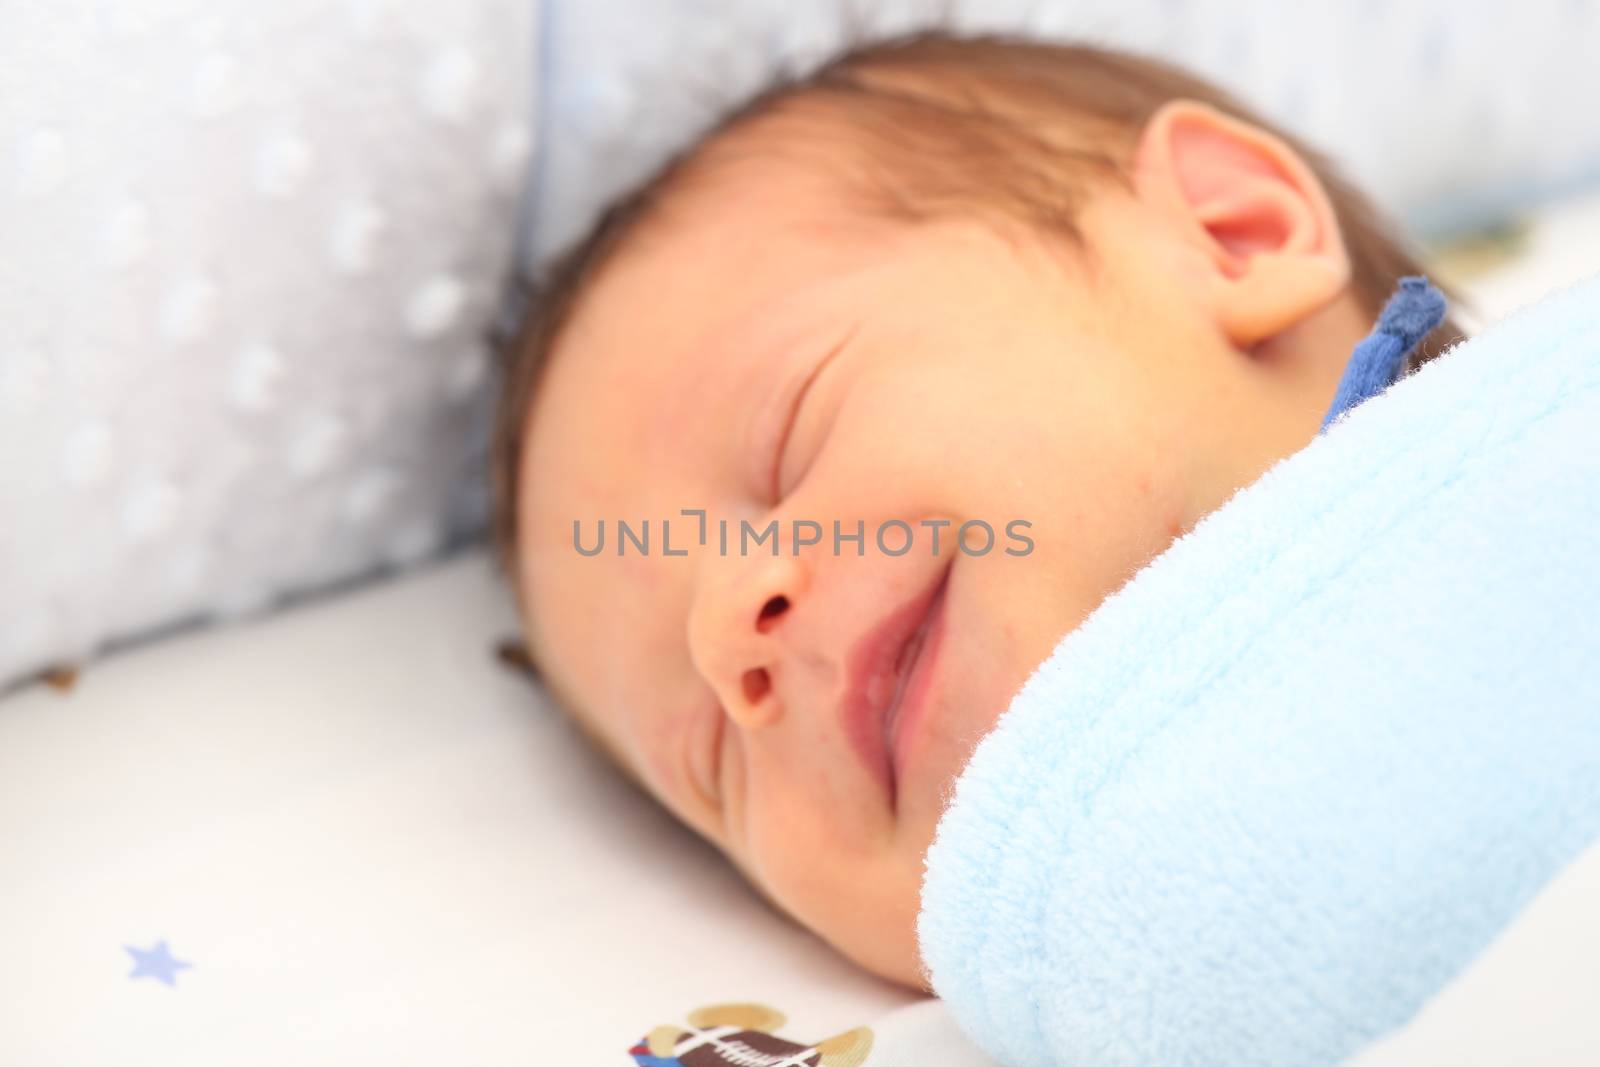 Blanket covering a newborn smiling. Focus in the blanket.